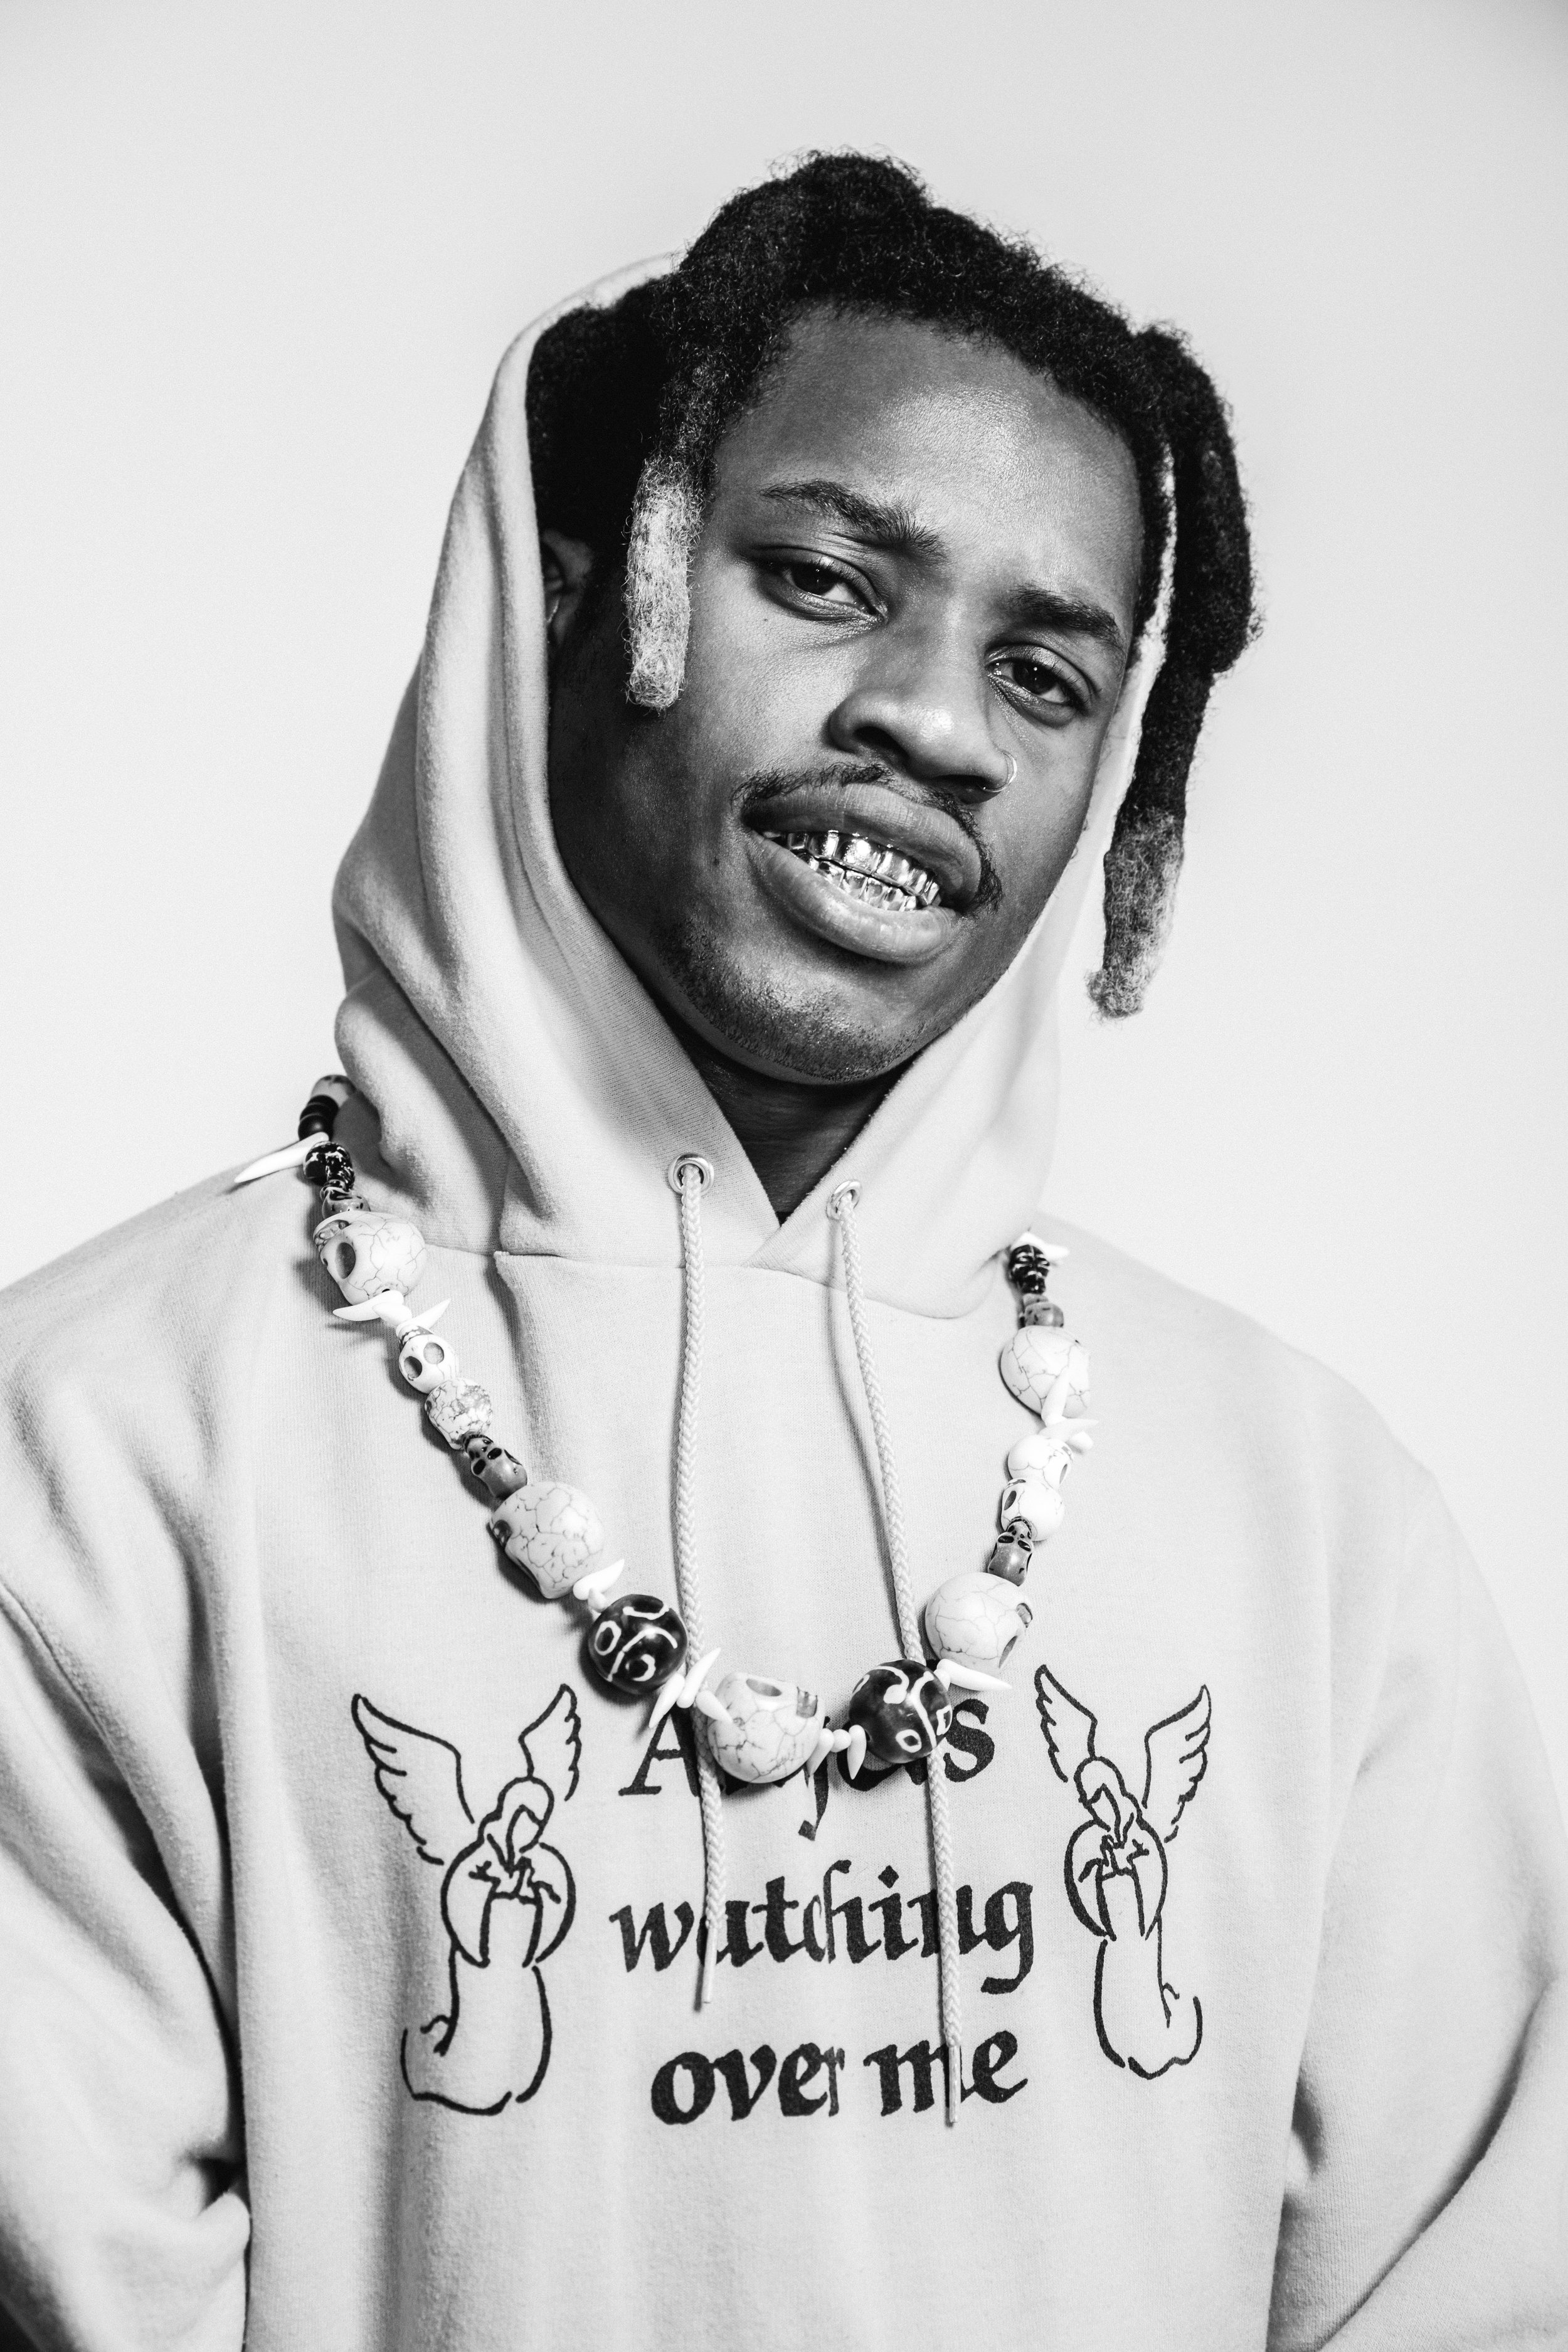 denzel curry top songs